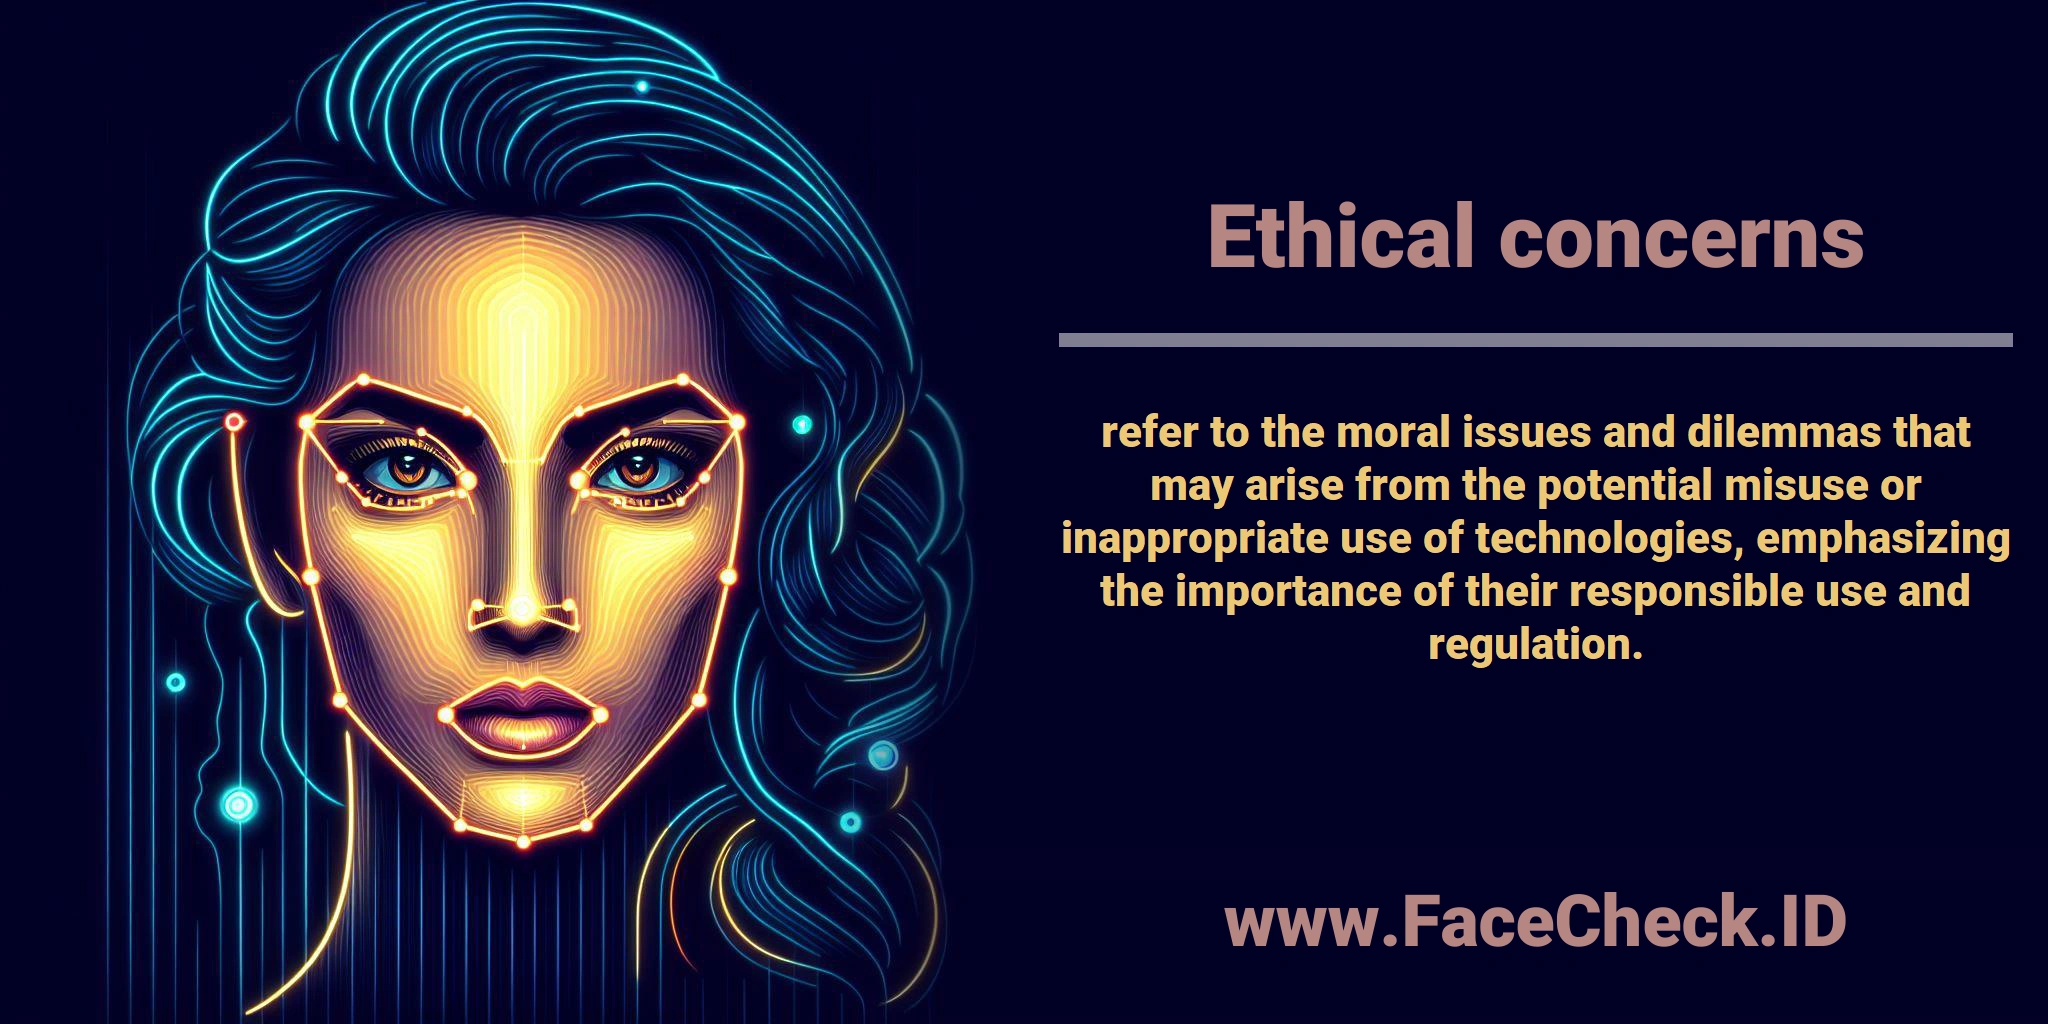 <b>Ethical concerns</b> refer to the moral issues and dilemmas that may arise from the potential misuse or inappropriate use of technologies, emphasizing the importance of their responsible use and regulation.